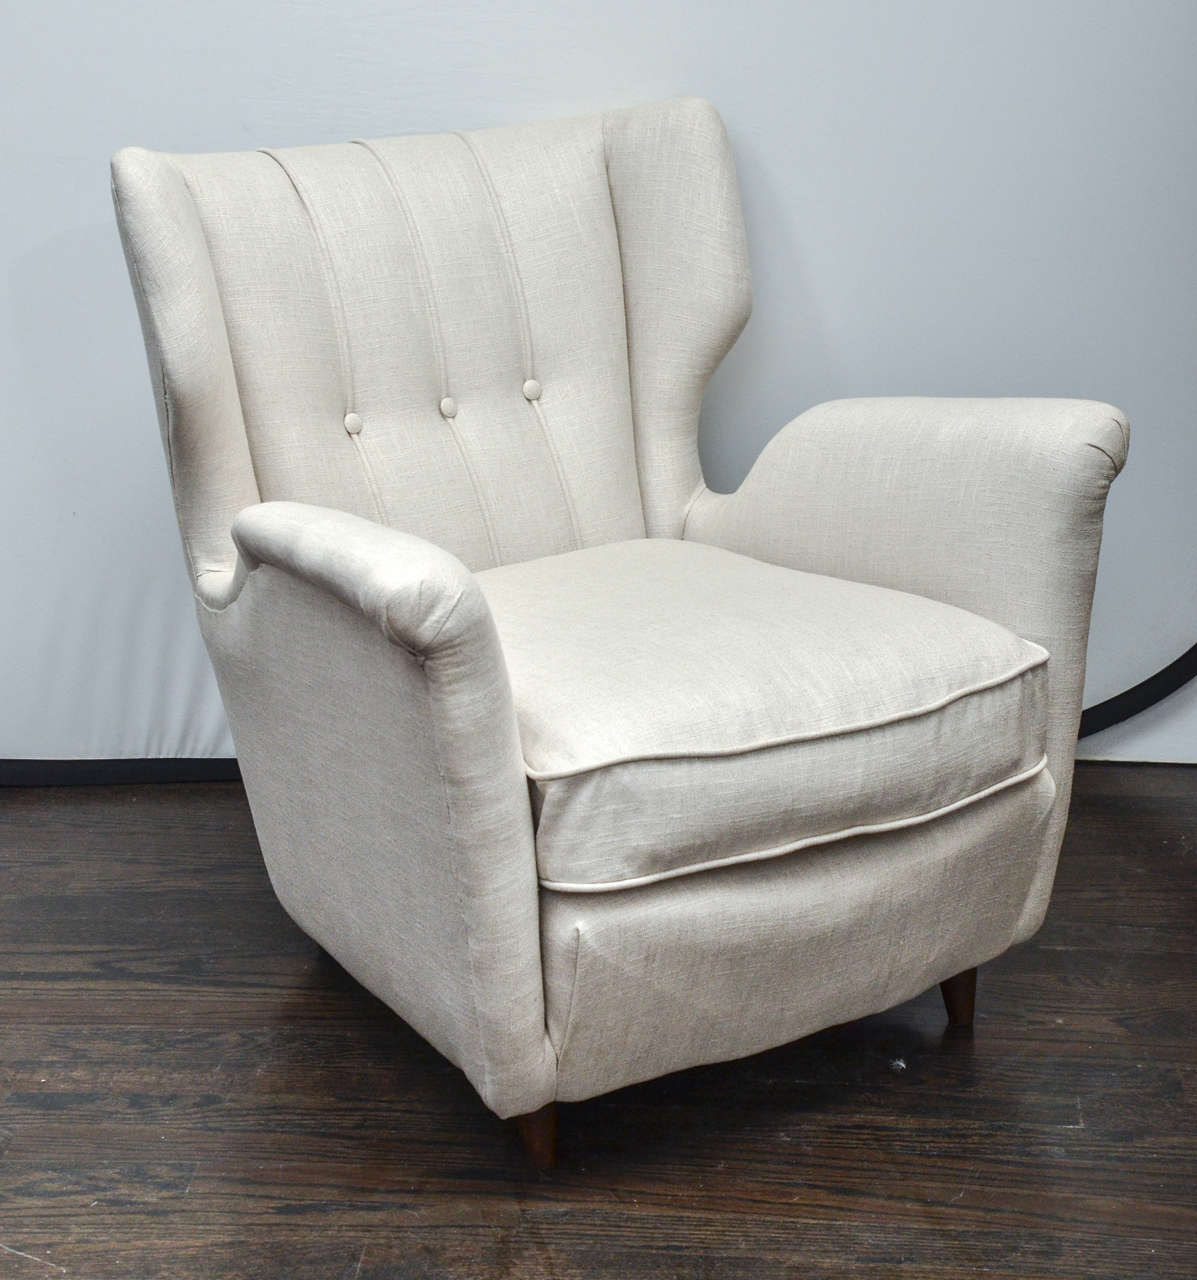 In the style of Gio Ponti Mid-Century pair of modern club chairs with notched out arms and deep seat cushion upholstered in linen.